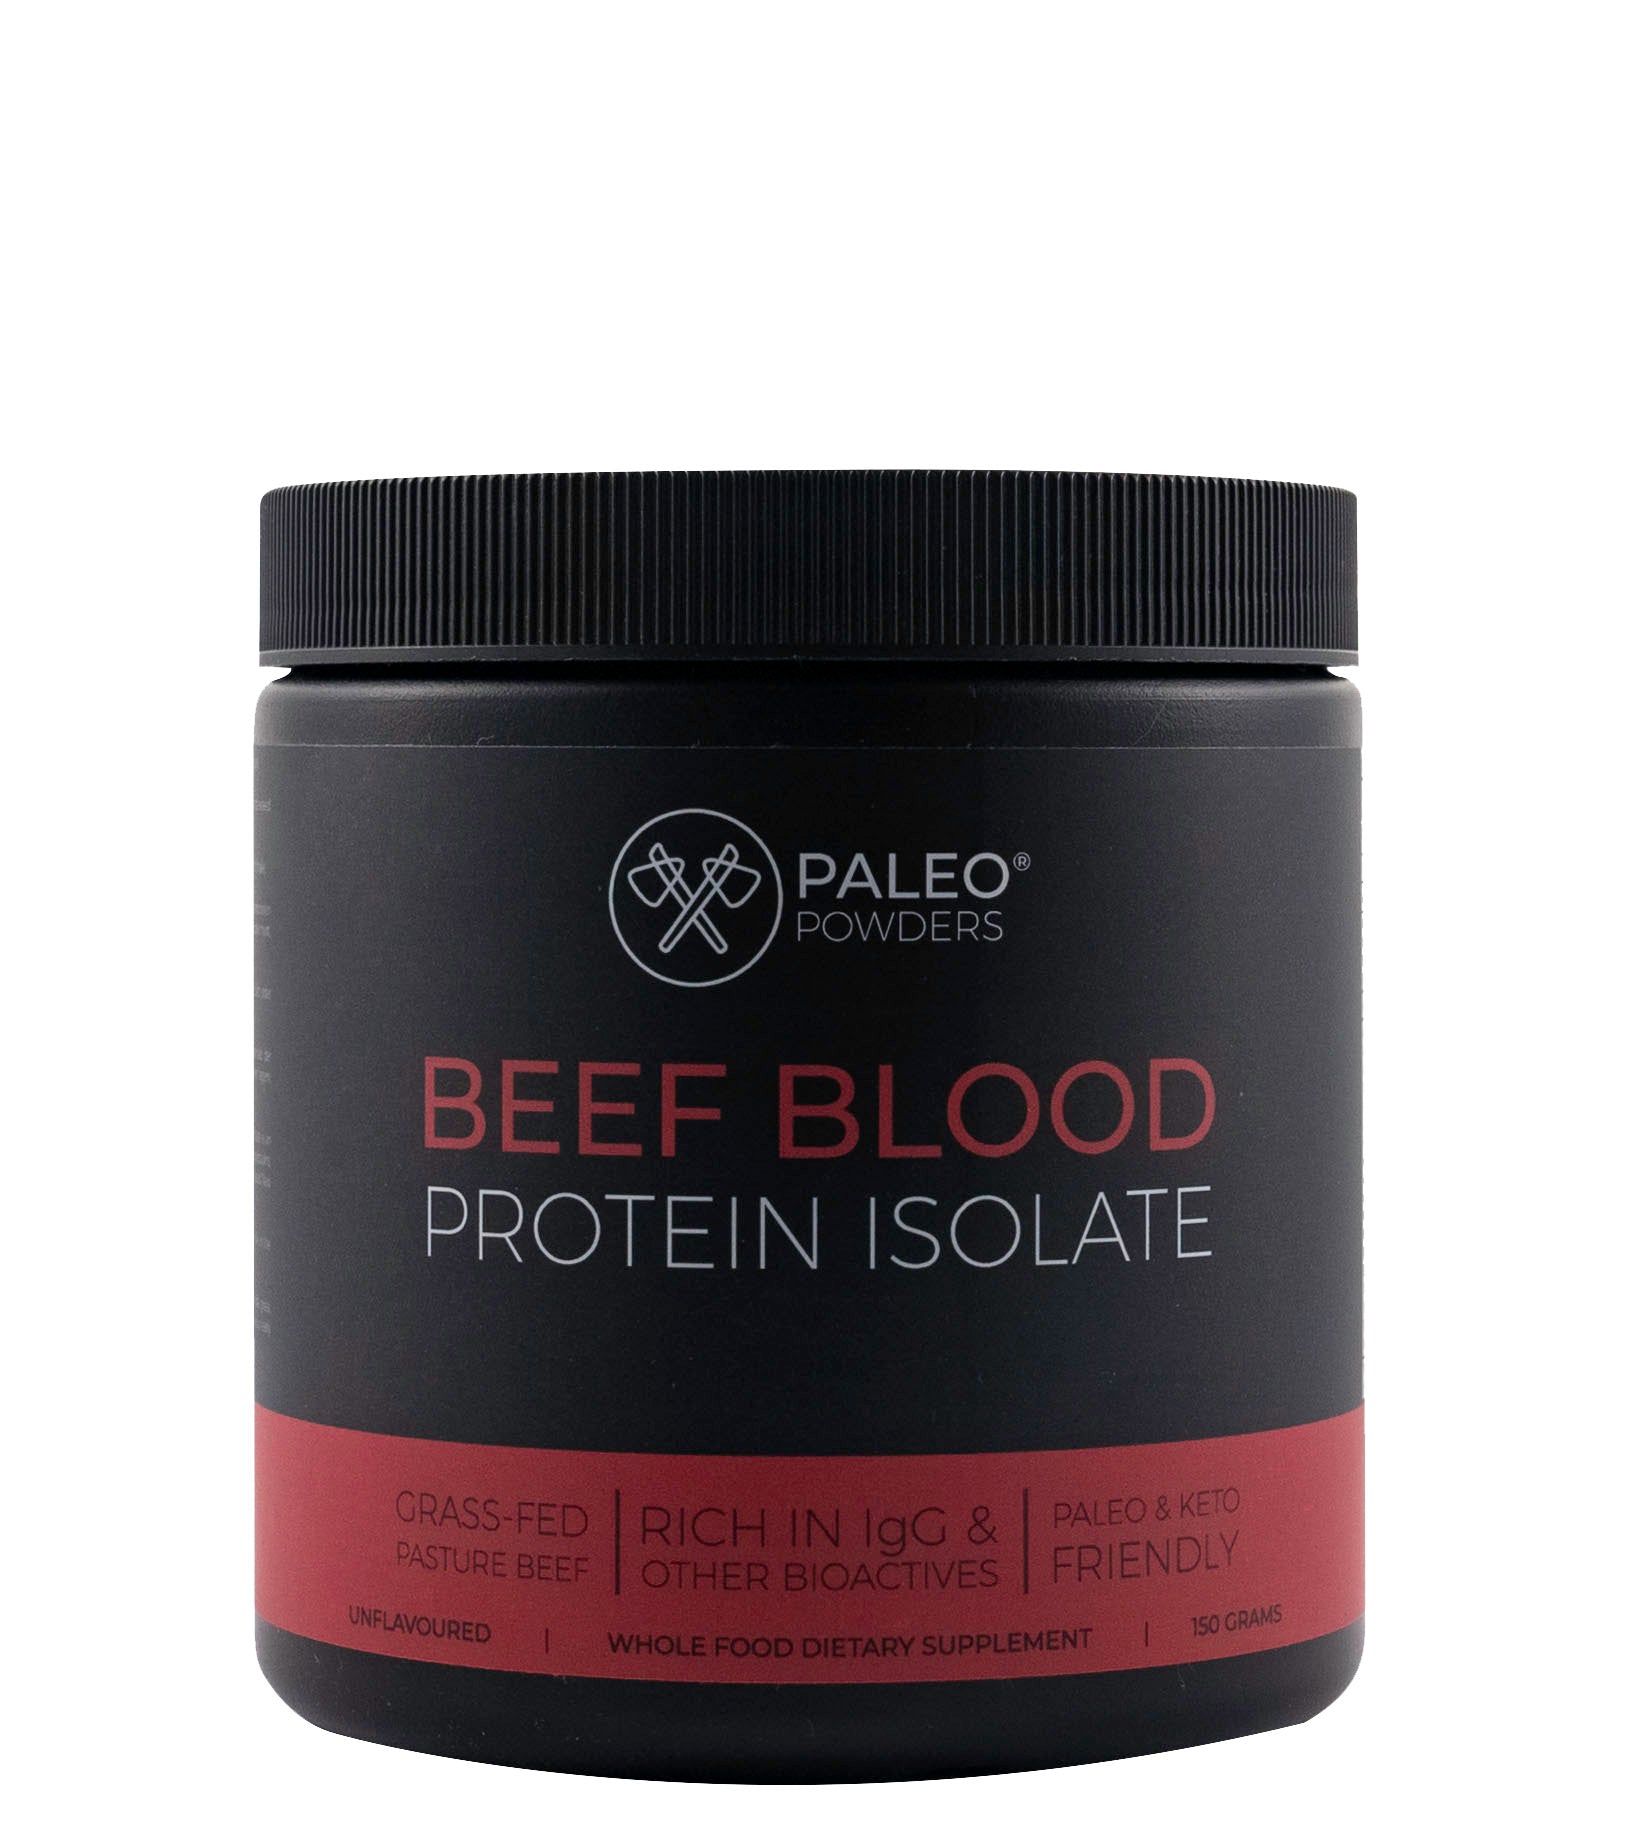 Beef Blood Protein Isolate - Grass-fed Beef - 150 g - Paleo Powders